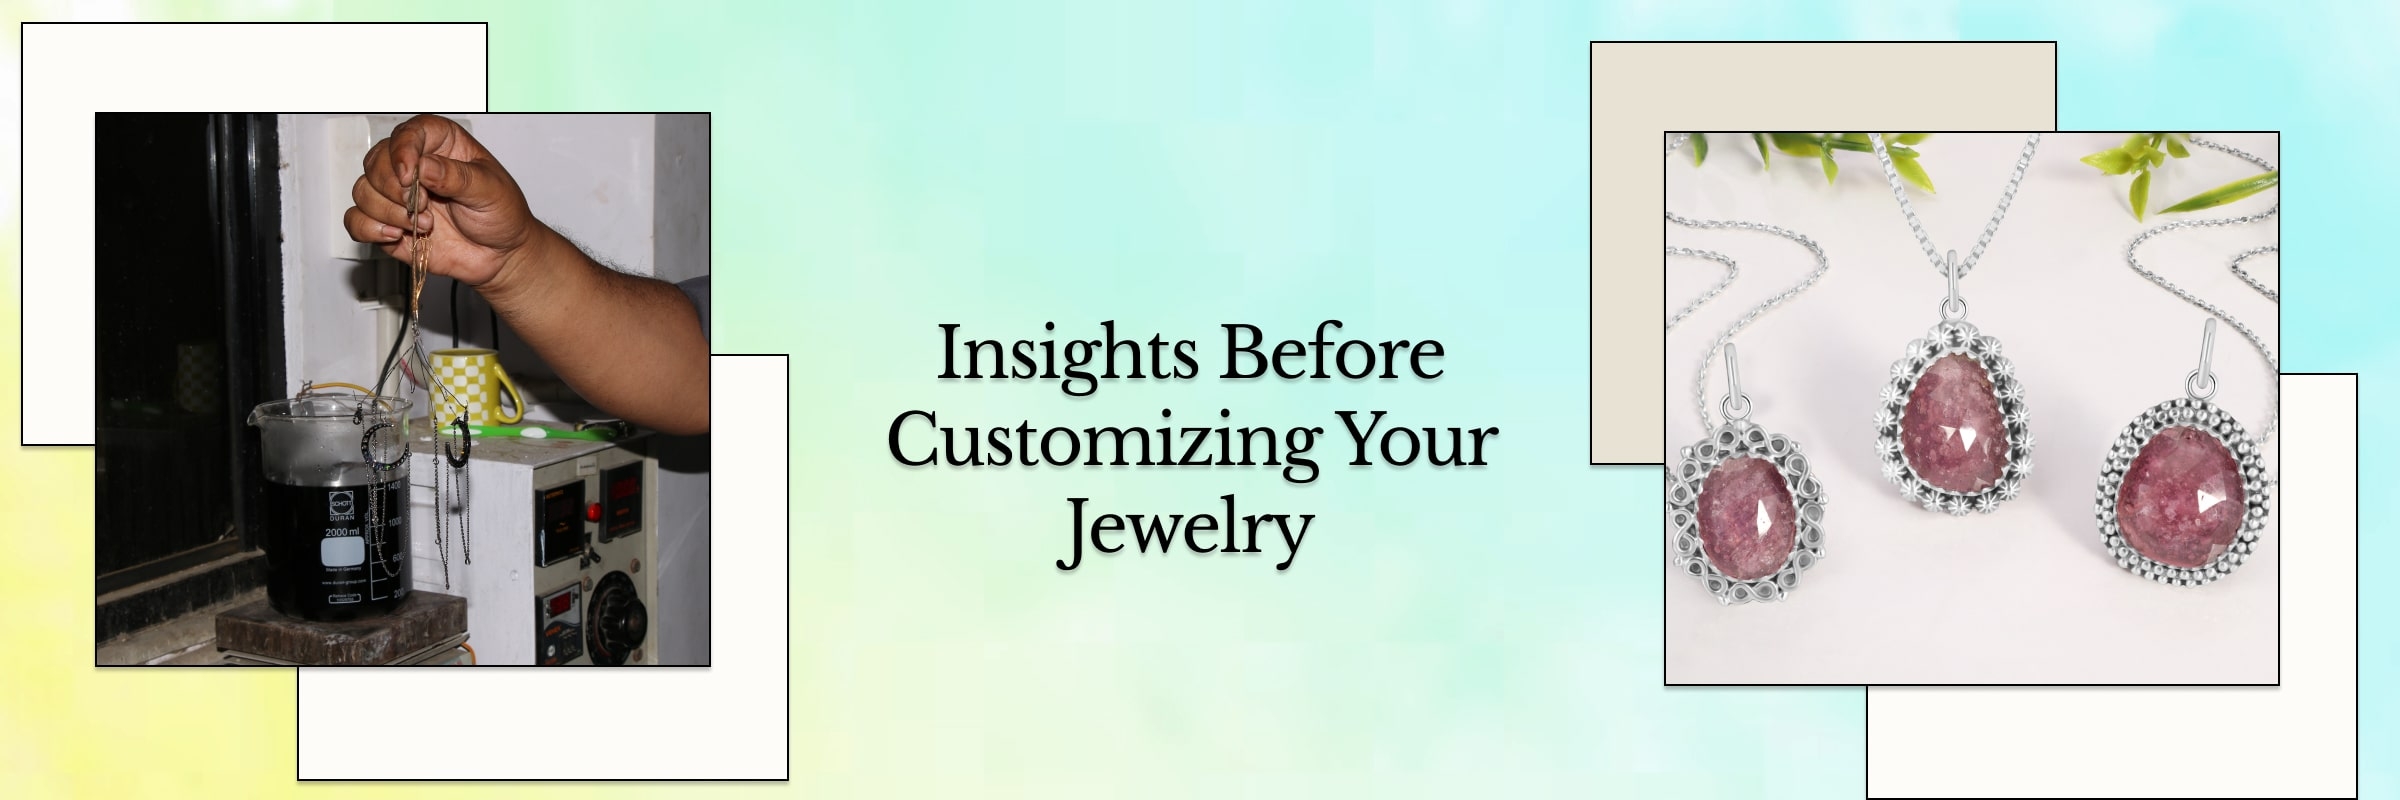 5 Things You Should Know Before Customizing Jewelry